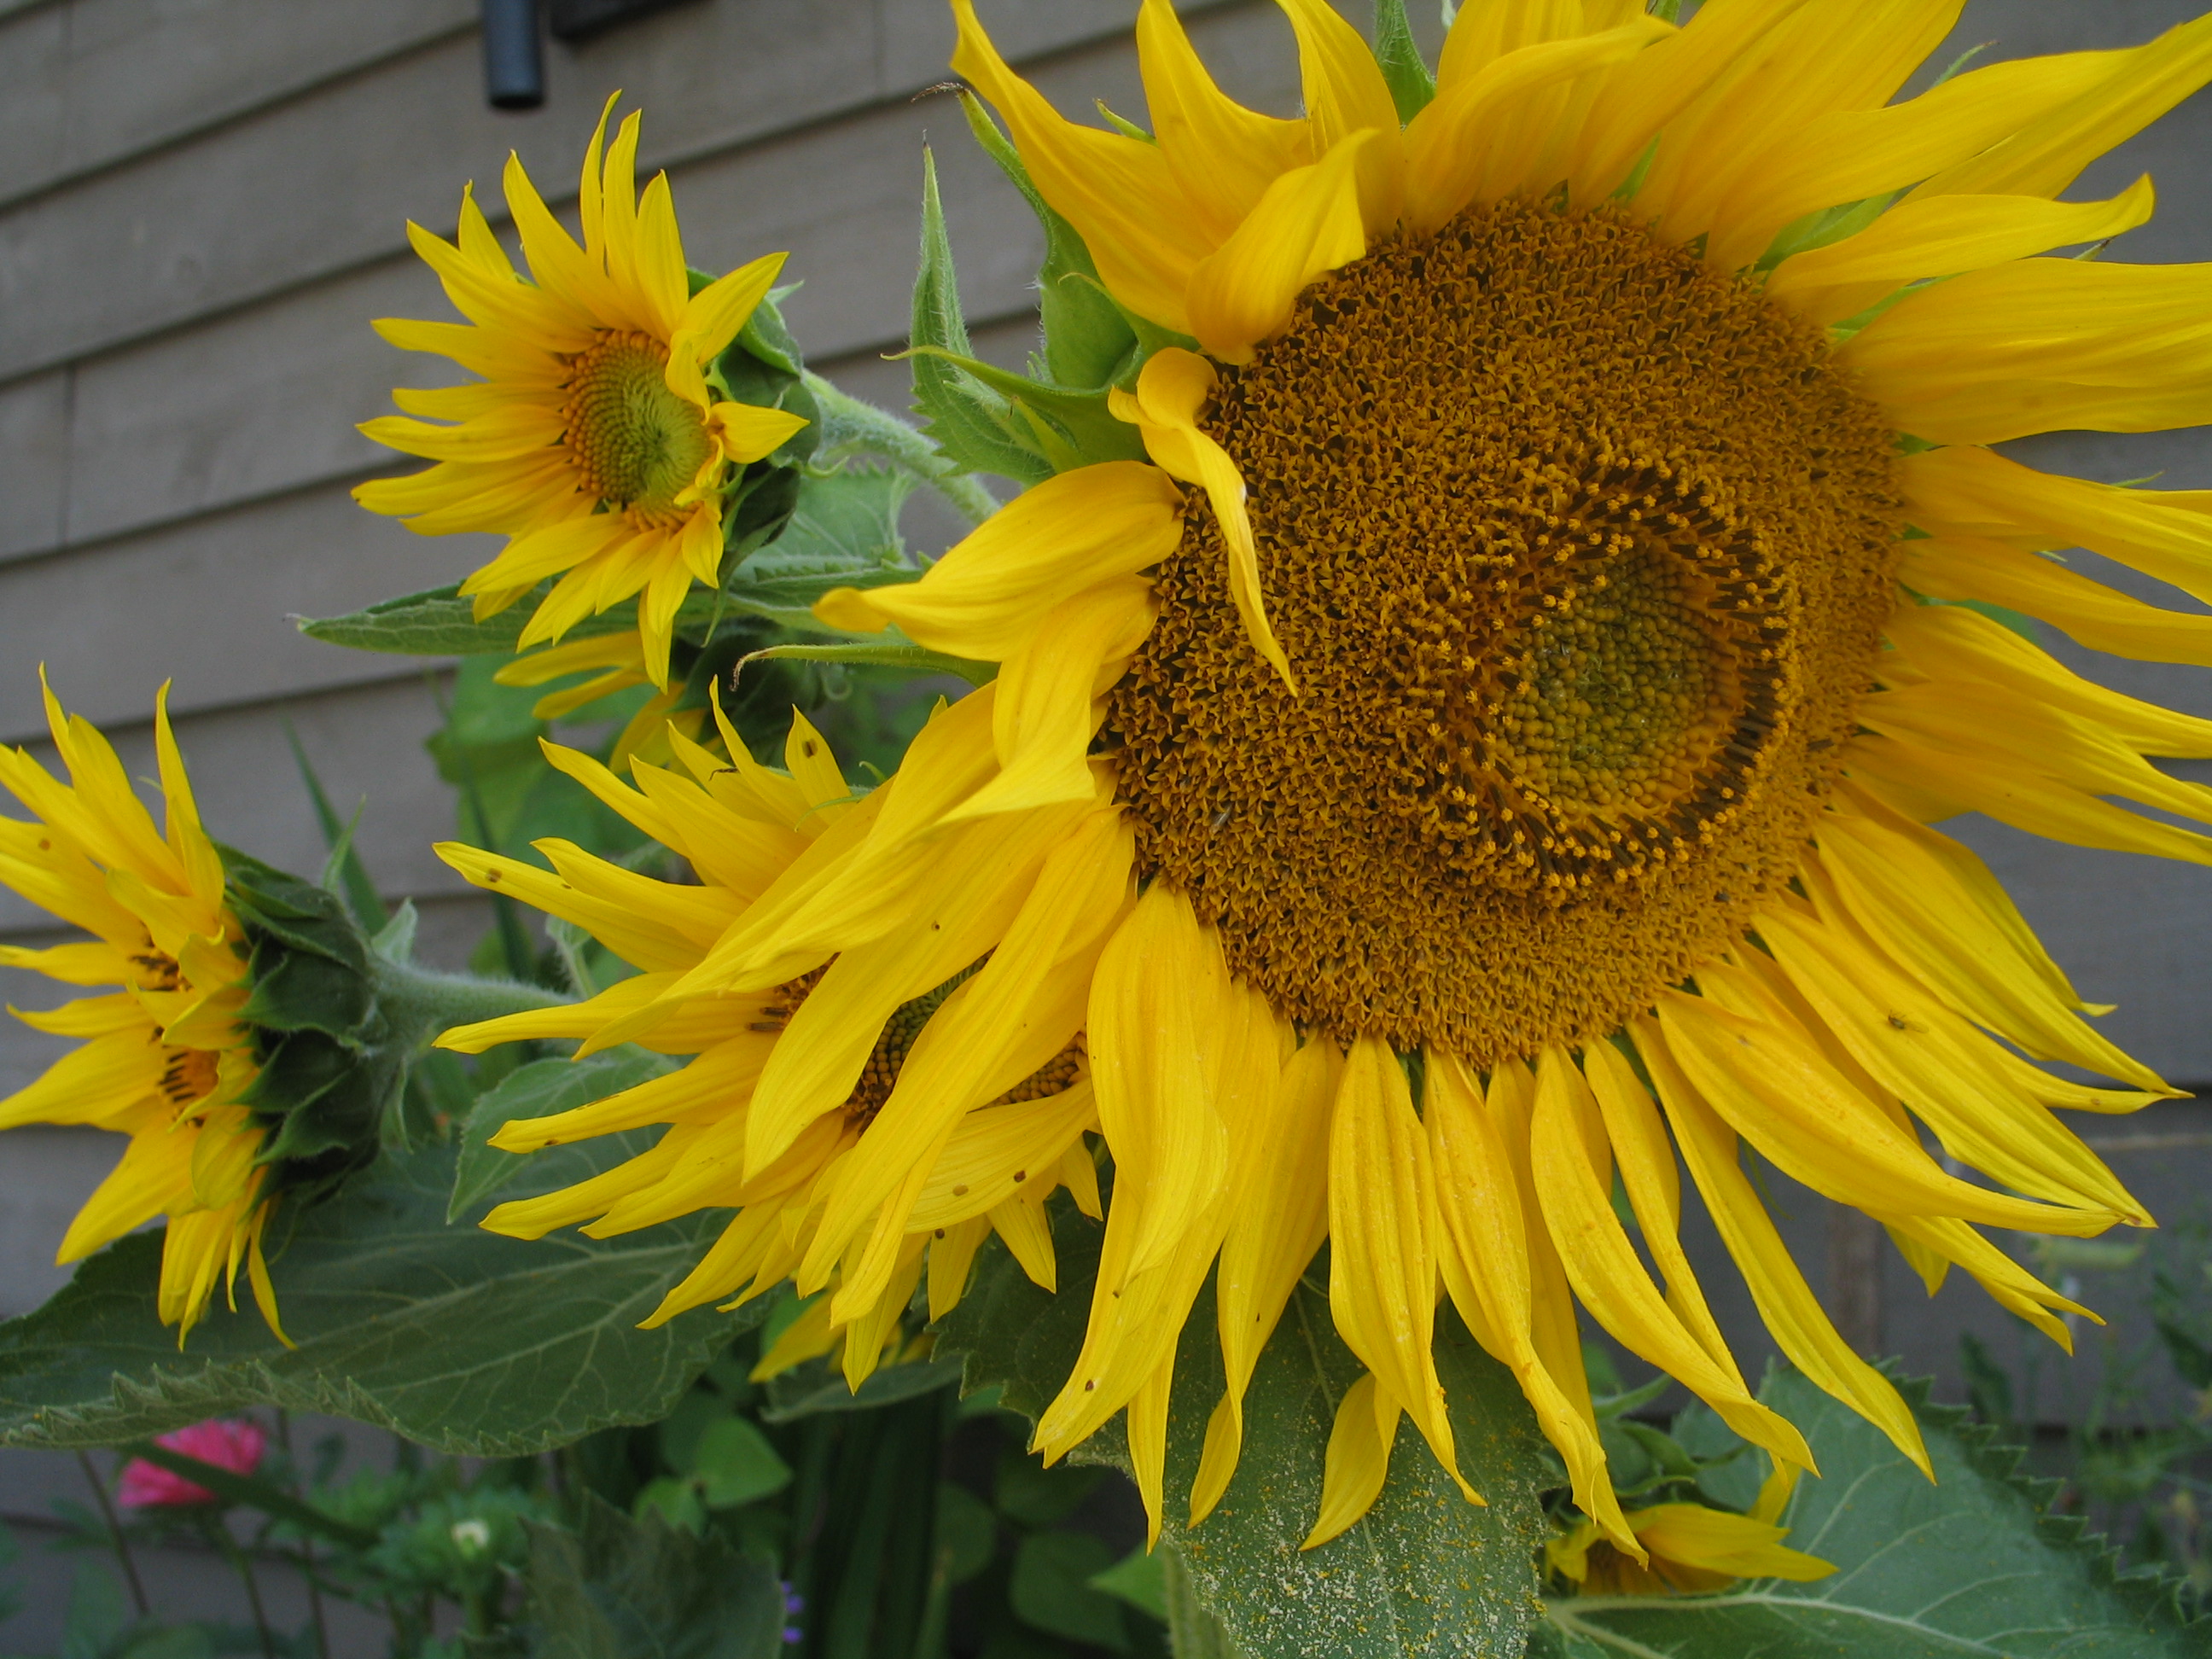 Sunflowers, Fibonacci number sequence and spitals